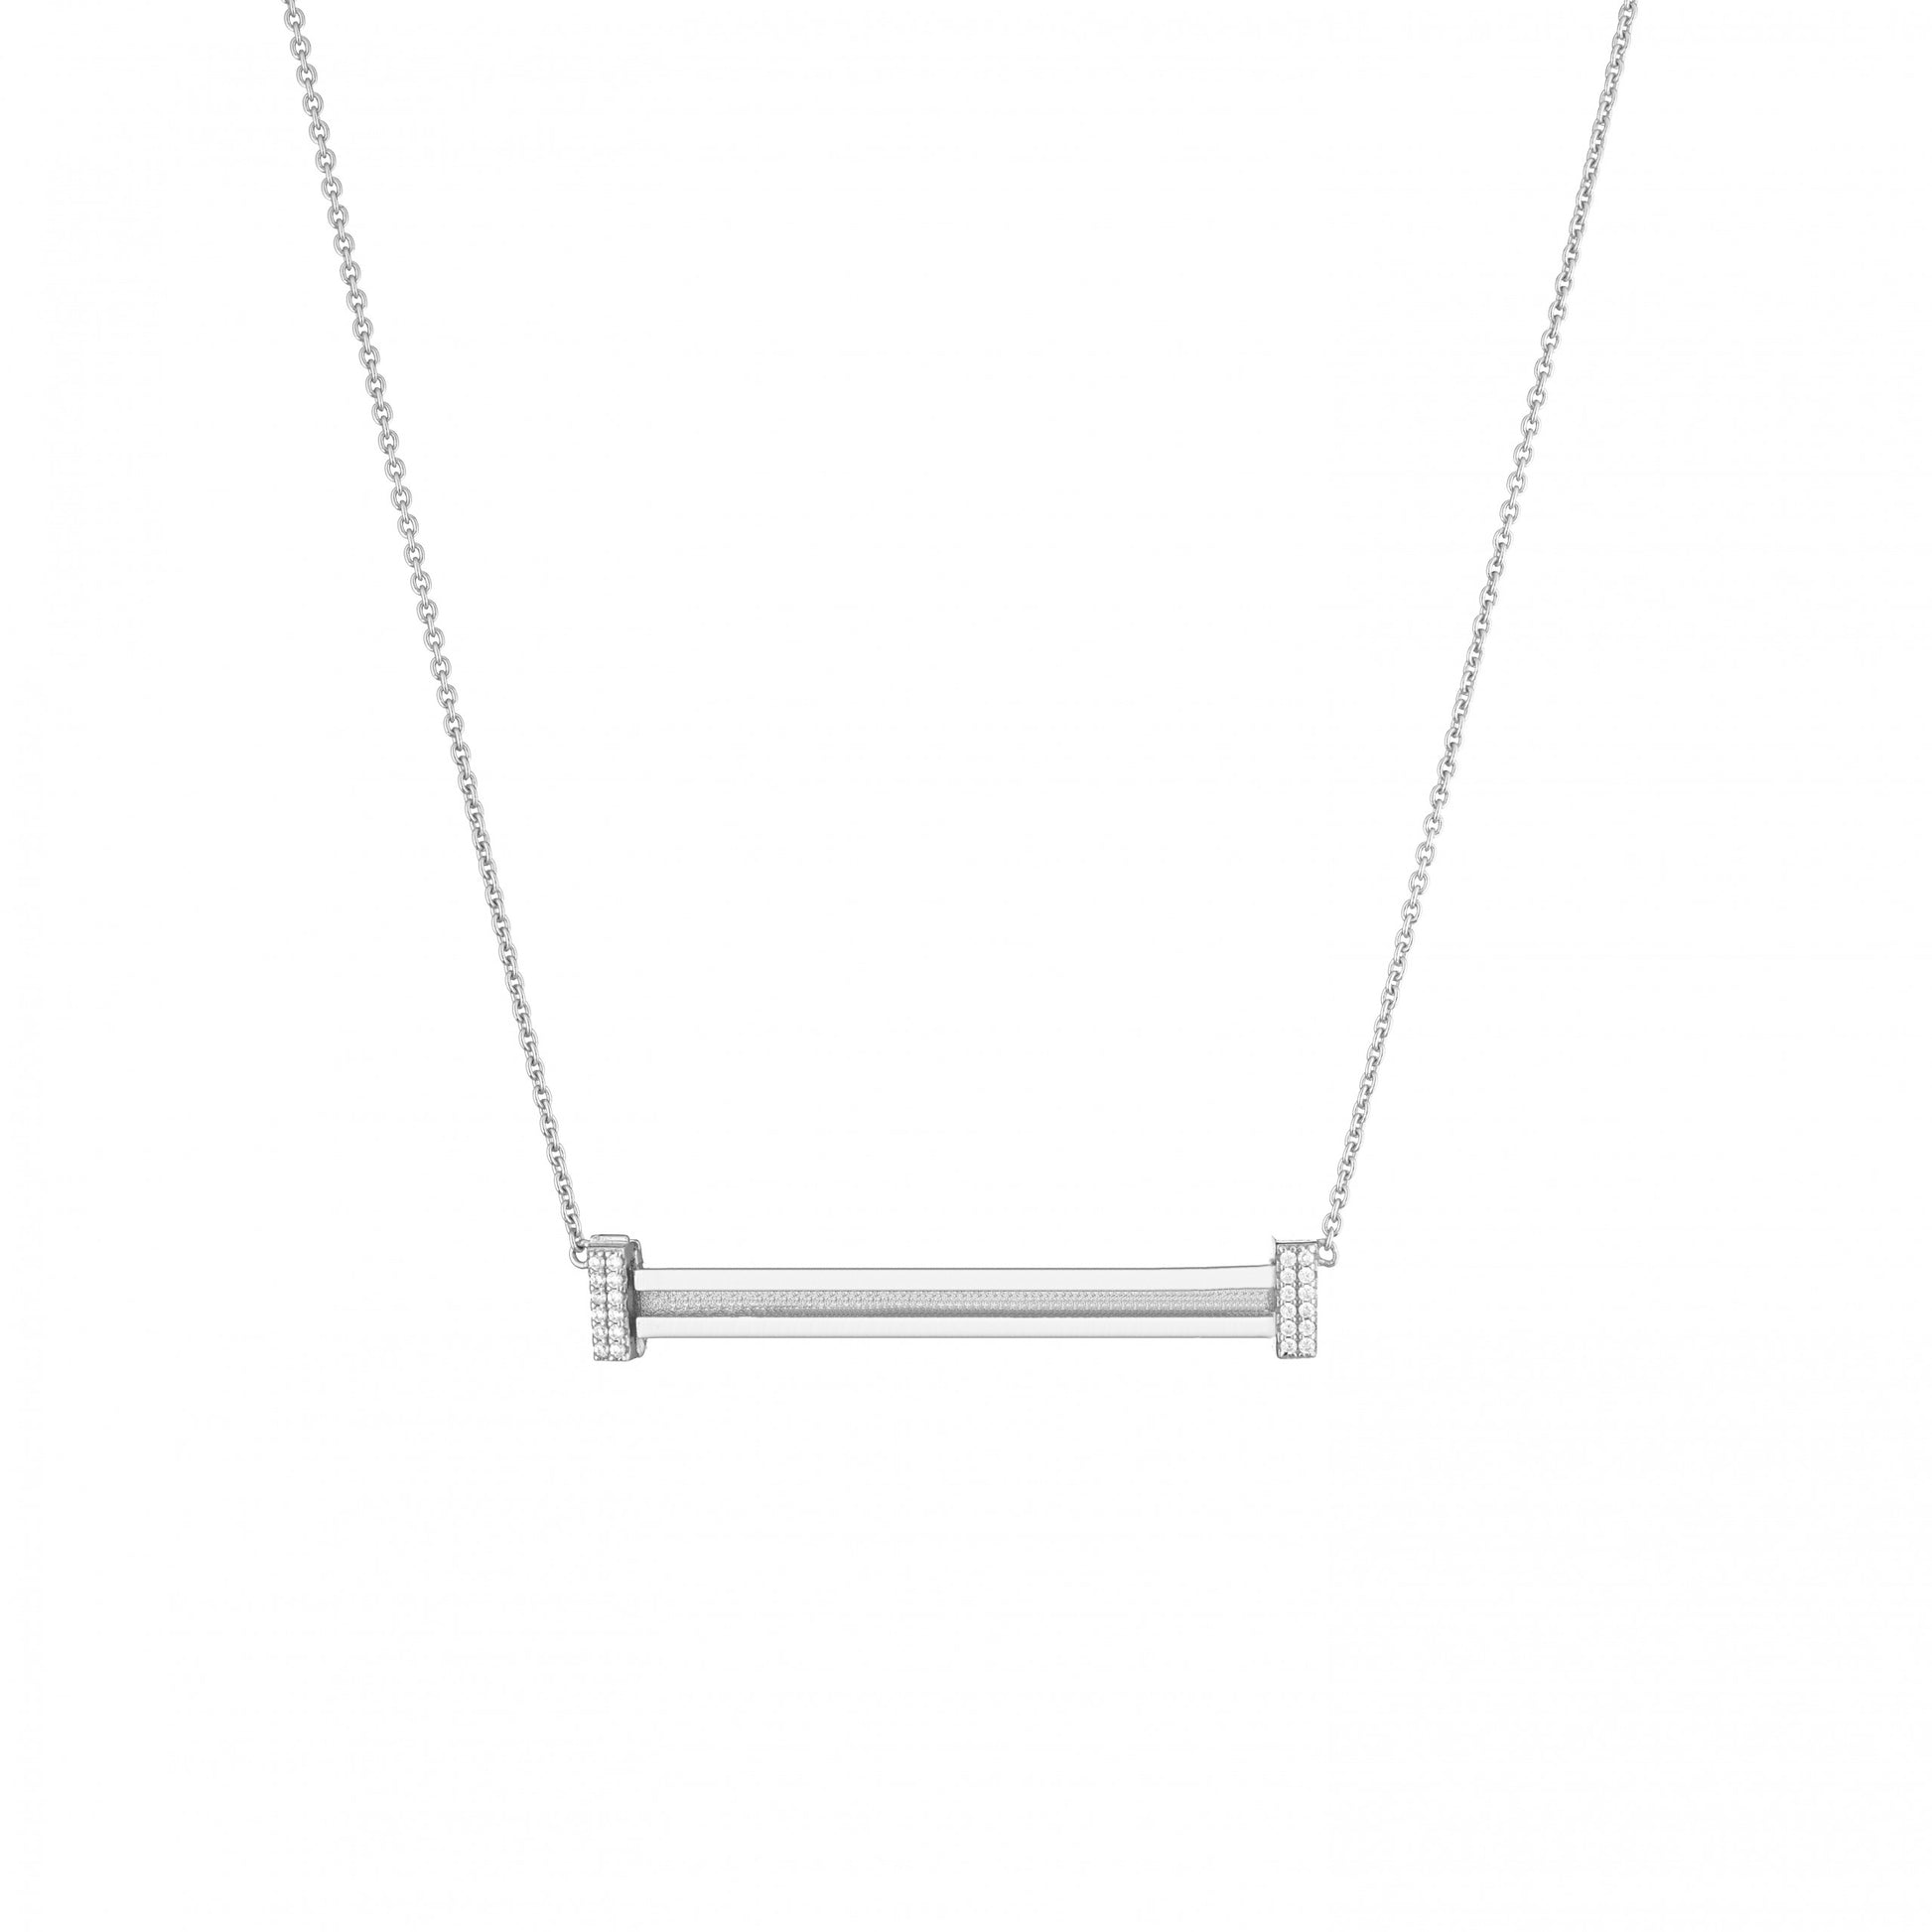 Many Element Necklace | Letters Collection | Marcello Pane | Luby 